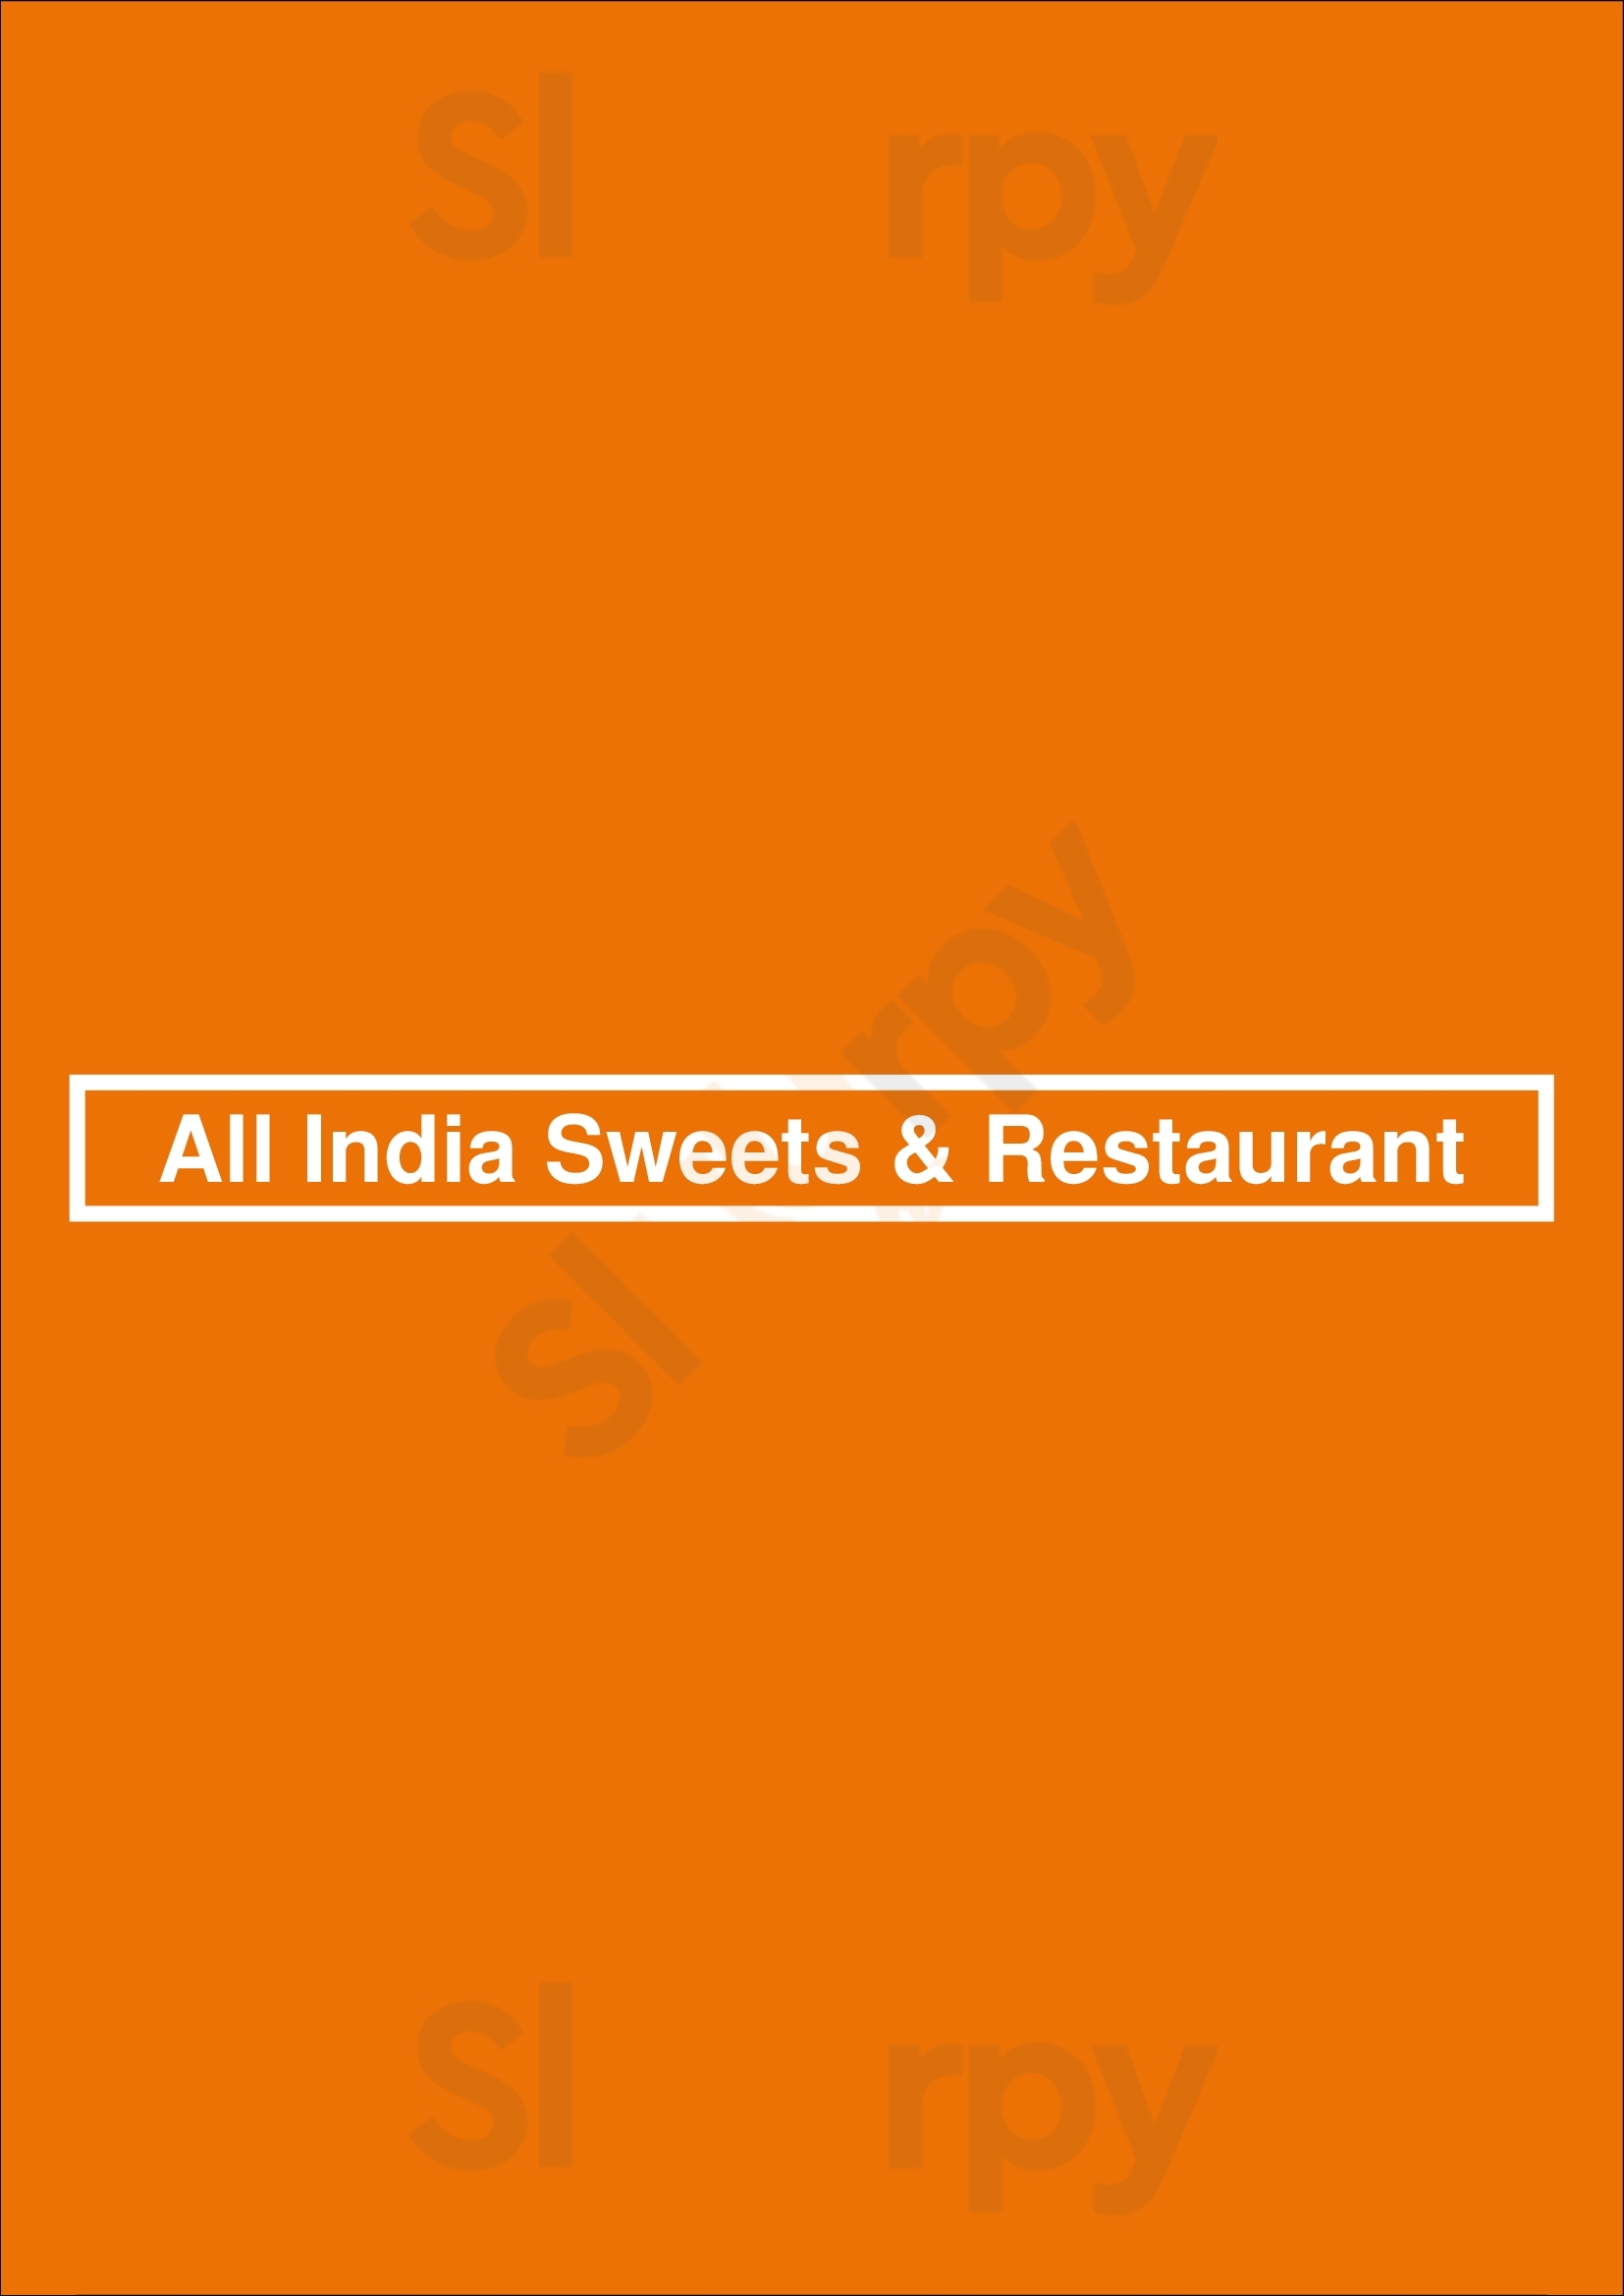 All India Sweets & Restaurant Vancouver Menu - 1